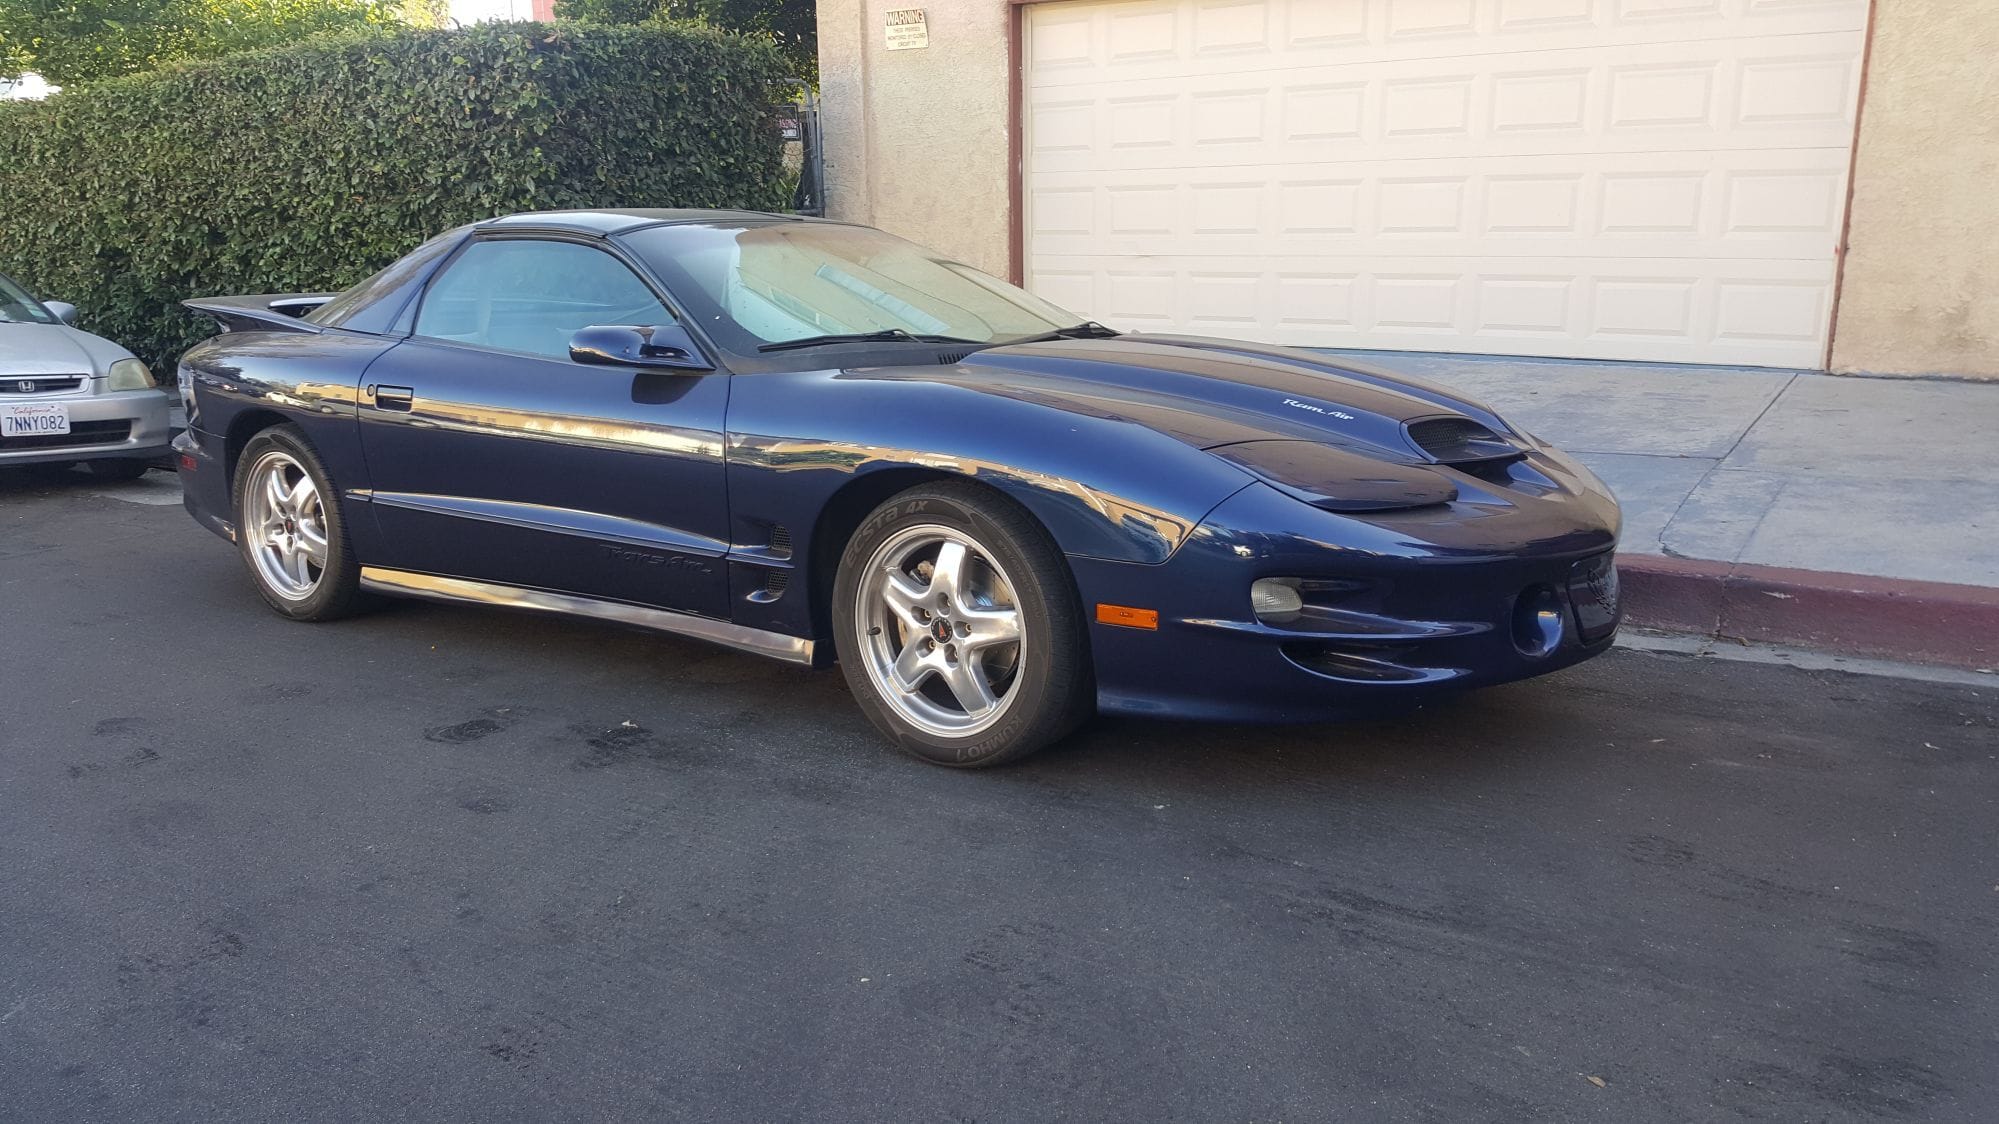 2002 Pontiac Firebird - 48K Mile WS-6 - Used - VIN 2G2FV22GX22162824 - 47,850 Miles - 8 cyl - 2WD - Manual - Coupe - Blue - Hollywood, CA 90028, United States